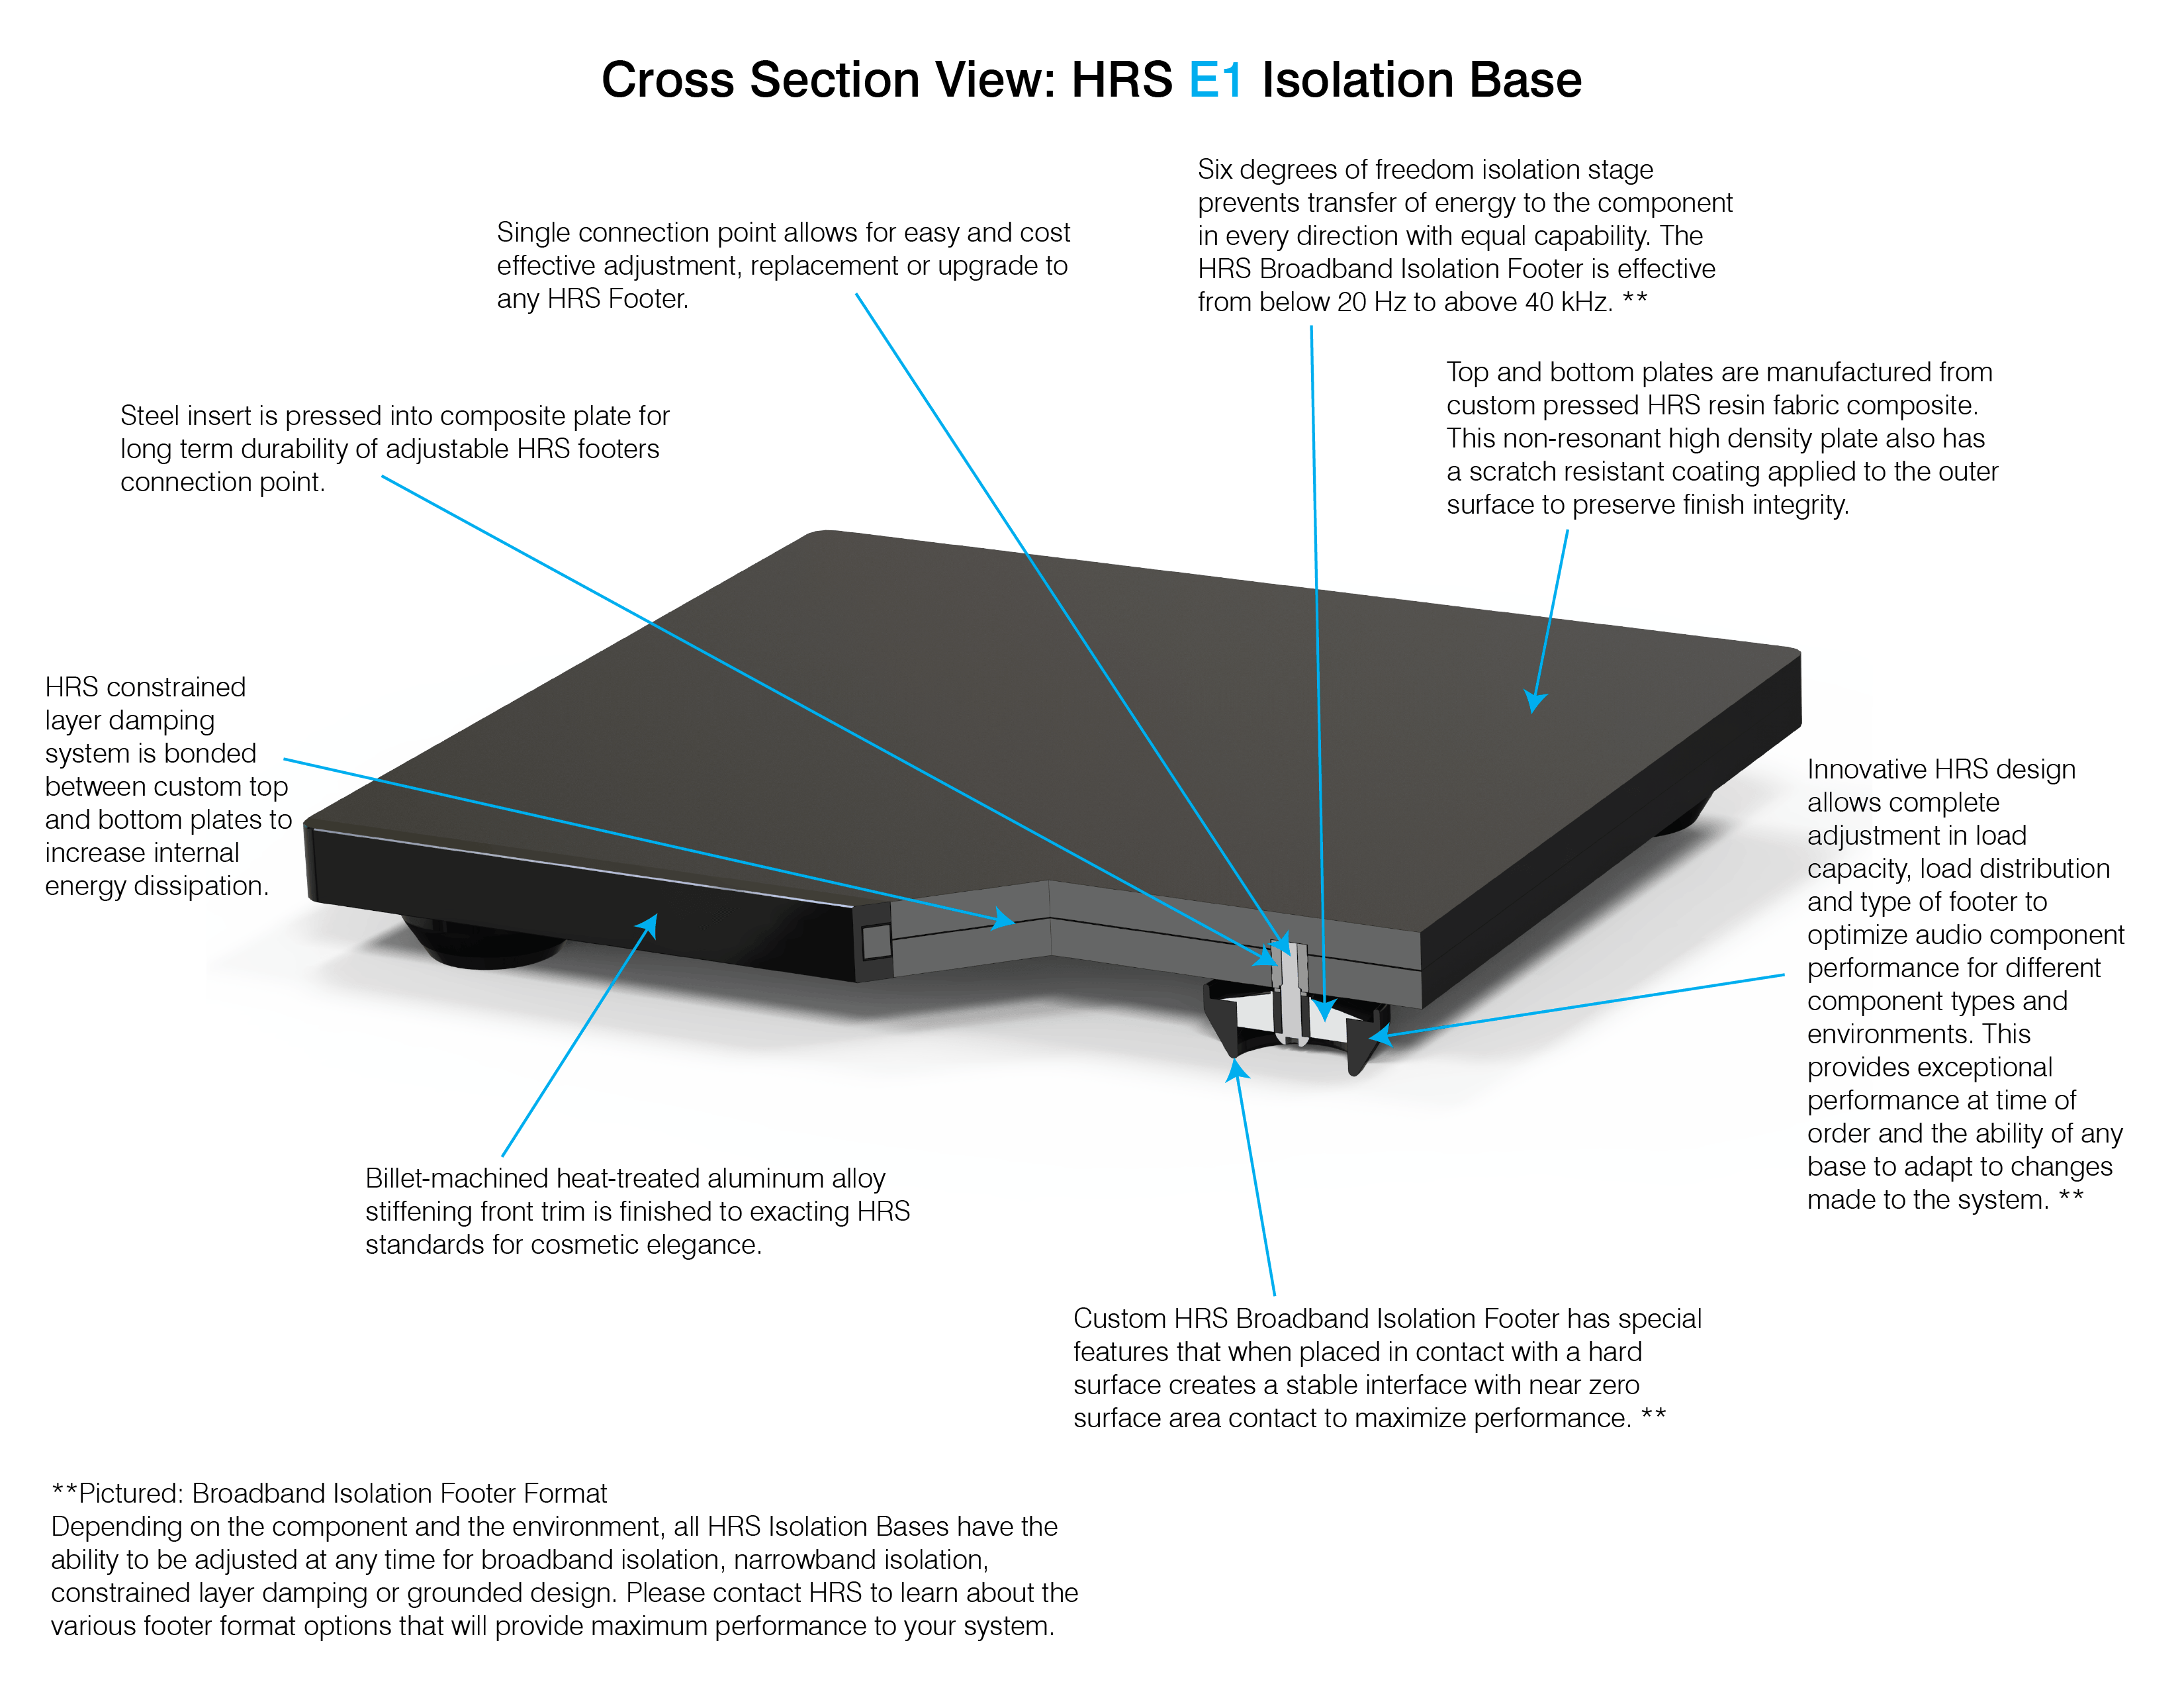 Cross Section View: HRS E1 Isolation Base